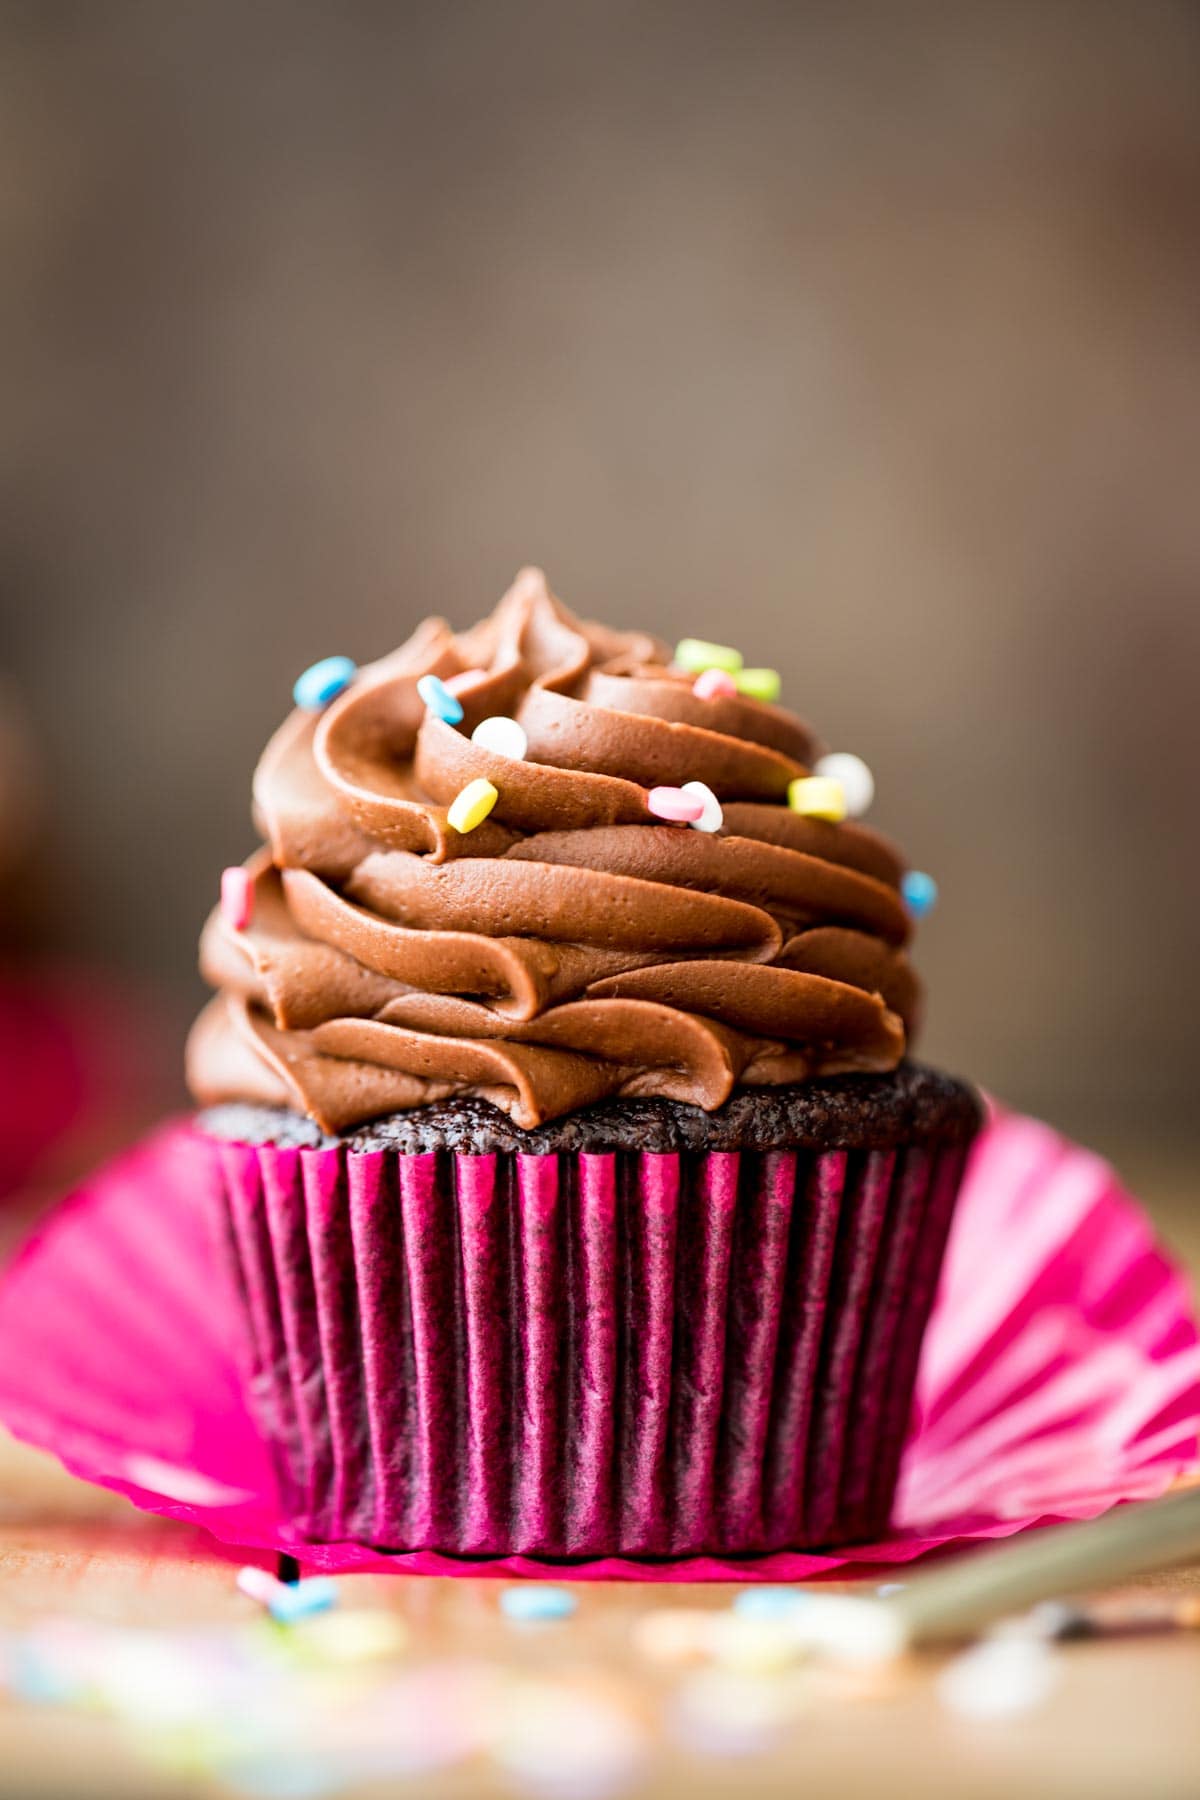 head-on view of a chocolate cupcake in a hot pink cupcake wrapper topped with piped chocolate frosting and rainbow sprinkles 